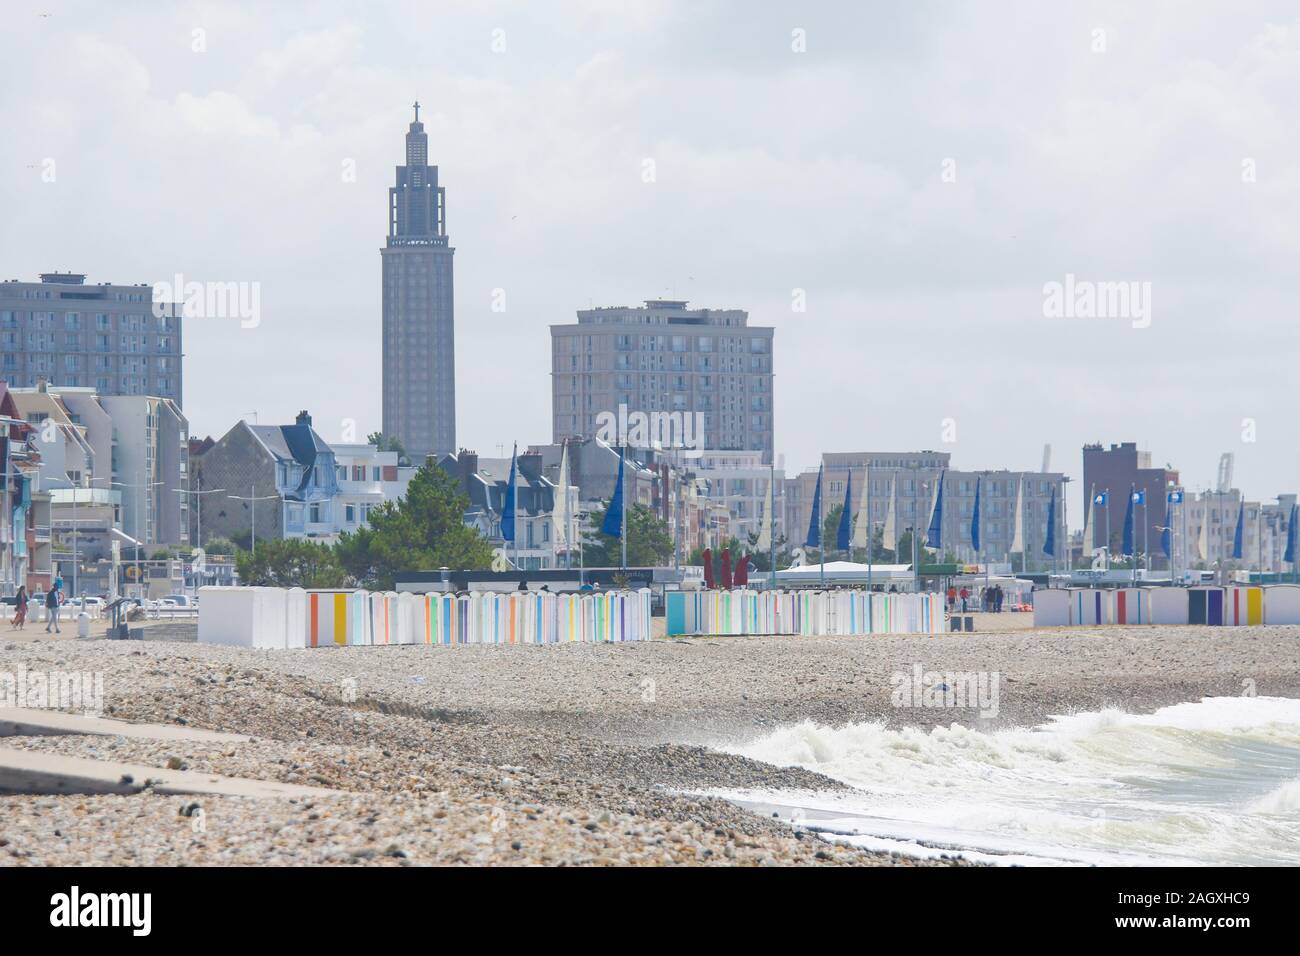 Skyline with the famous belltower of St. Joseph's Church in Le Havre, Seine-Maritime, Normandy, France, by the North Sea Stock Photo